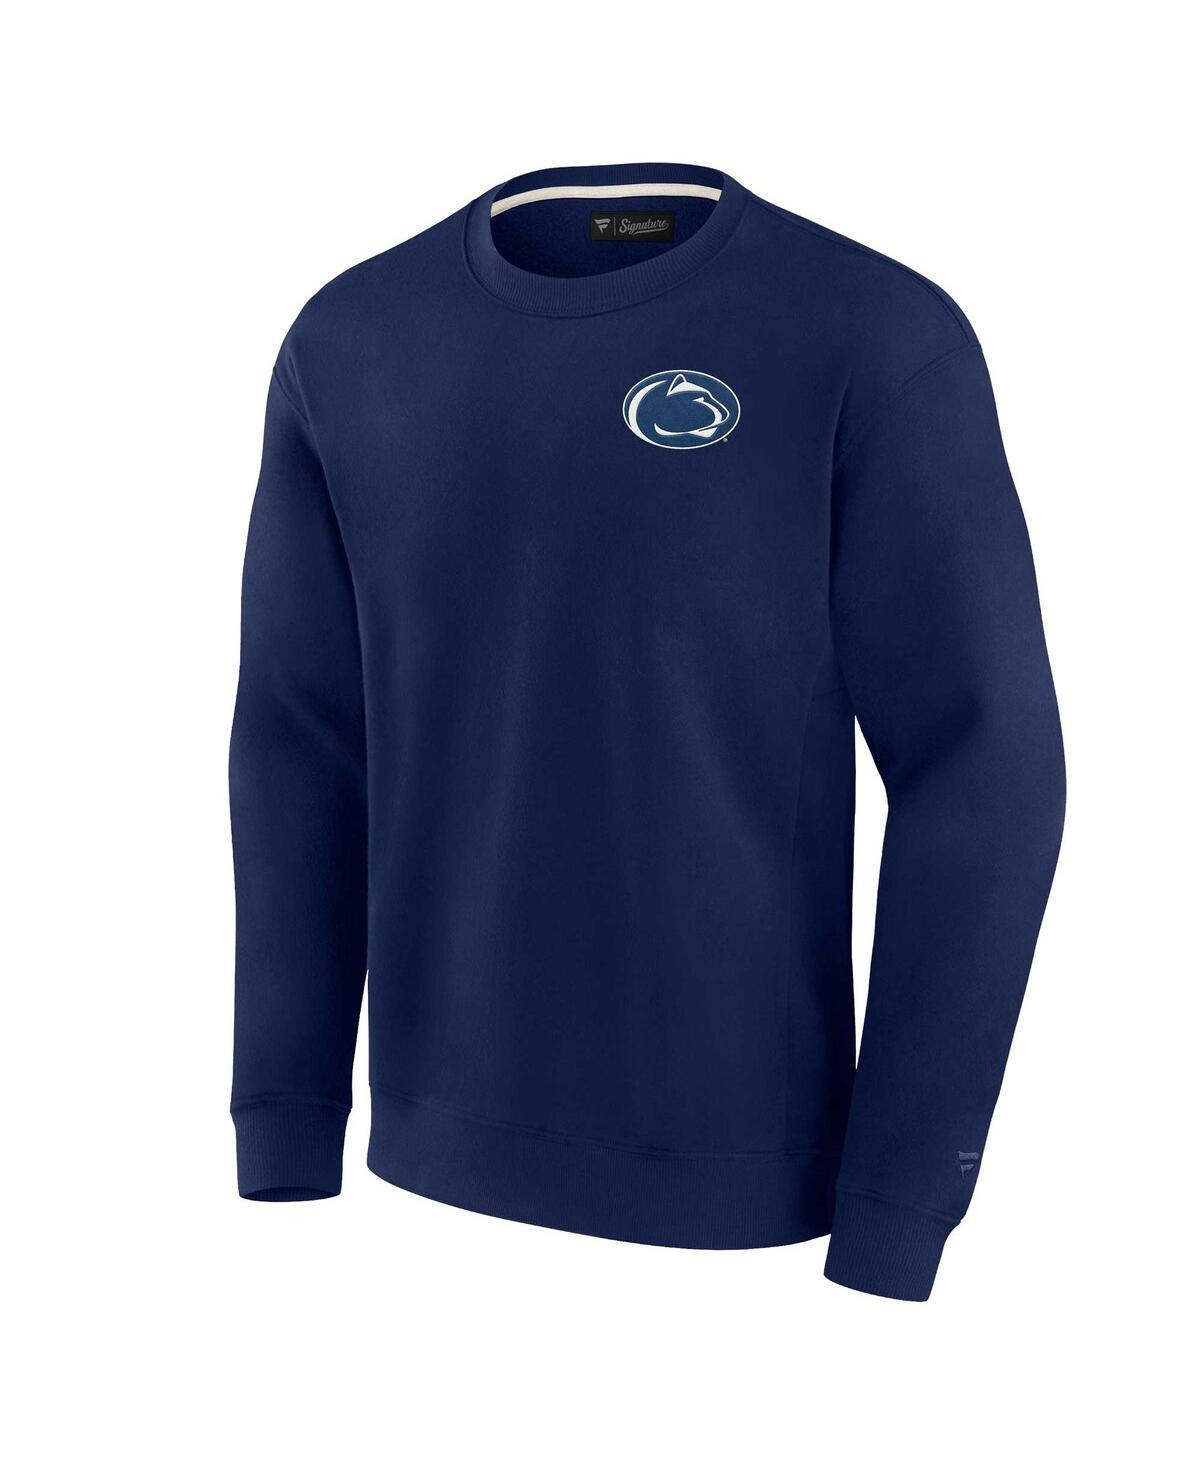 Shop Fanatics Signature Men's And Women's  Navy Penn State Nittany Lions Super Soft Pullover Crew Sweatshi